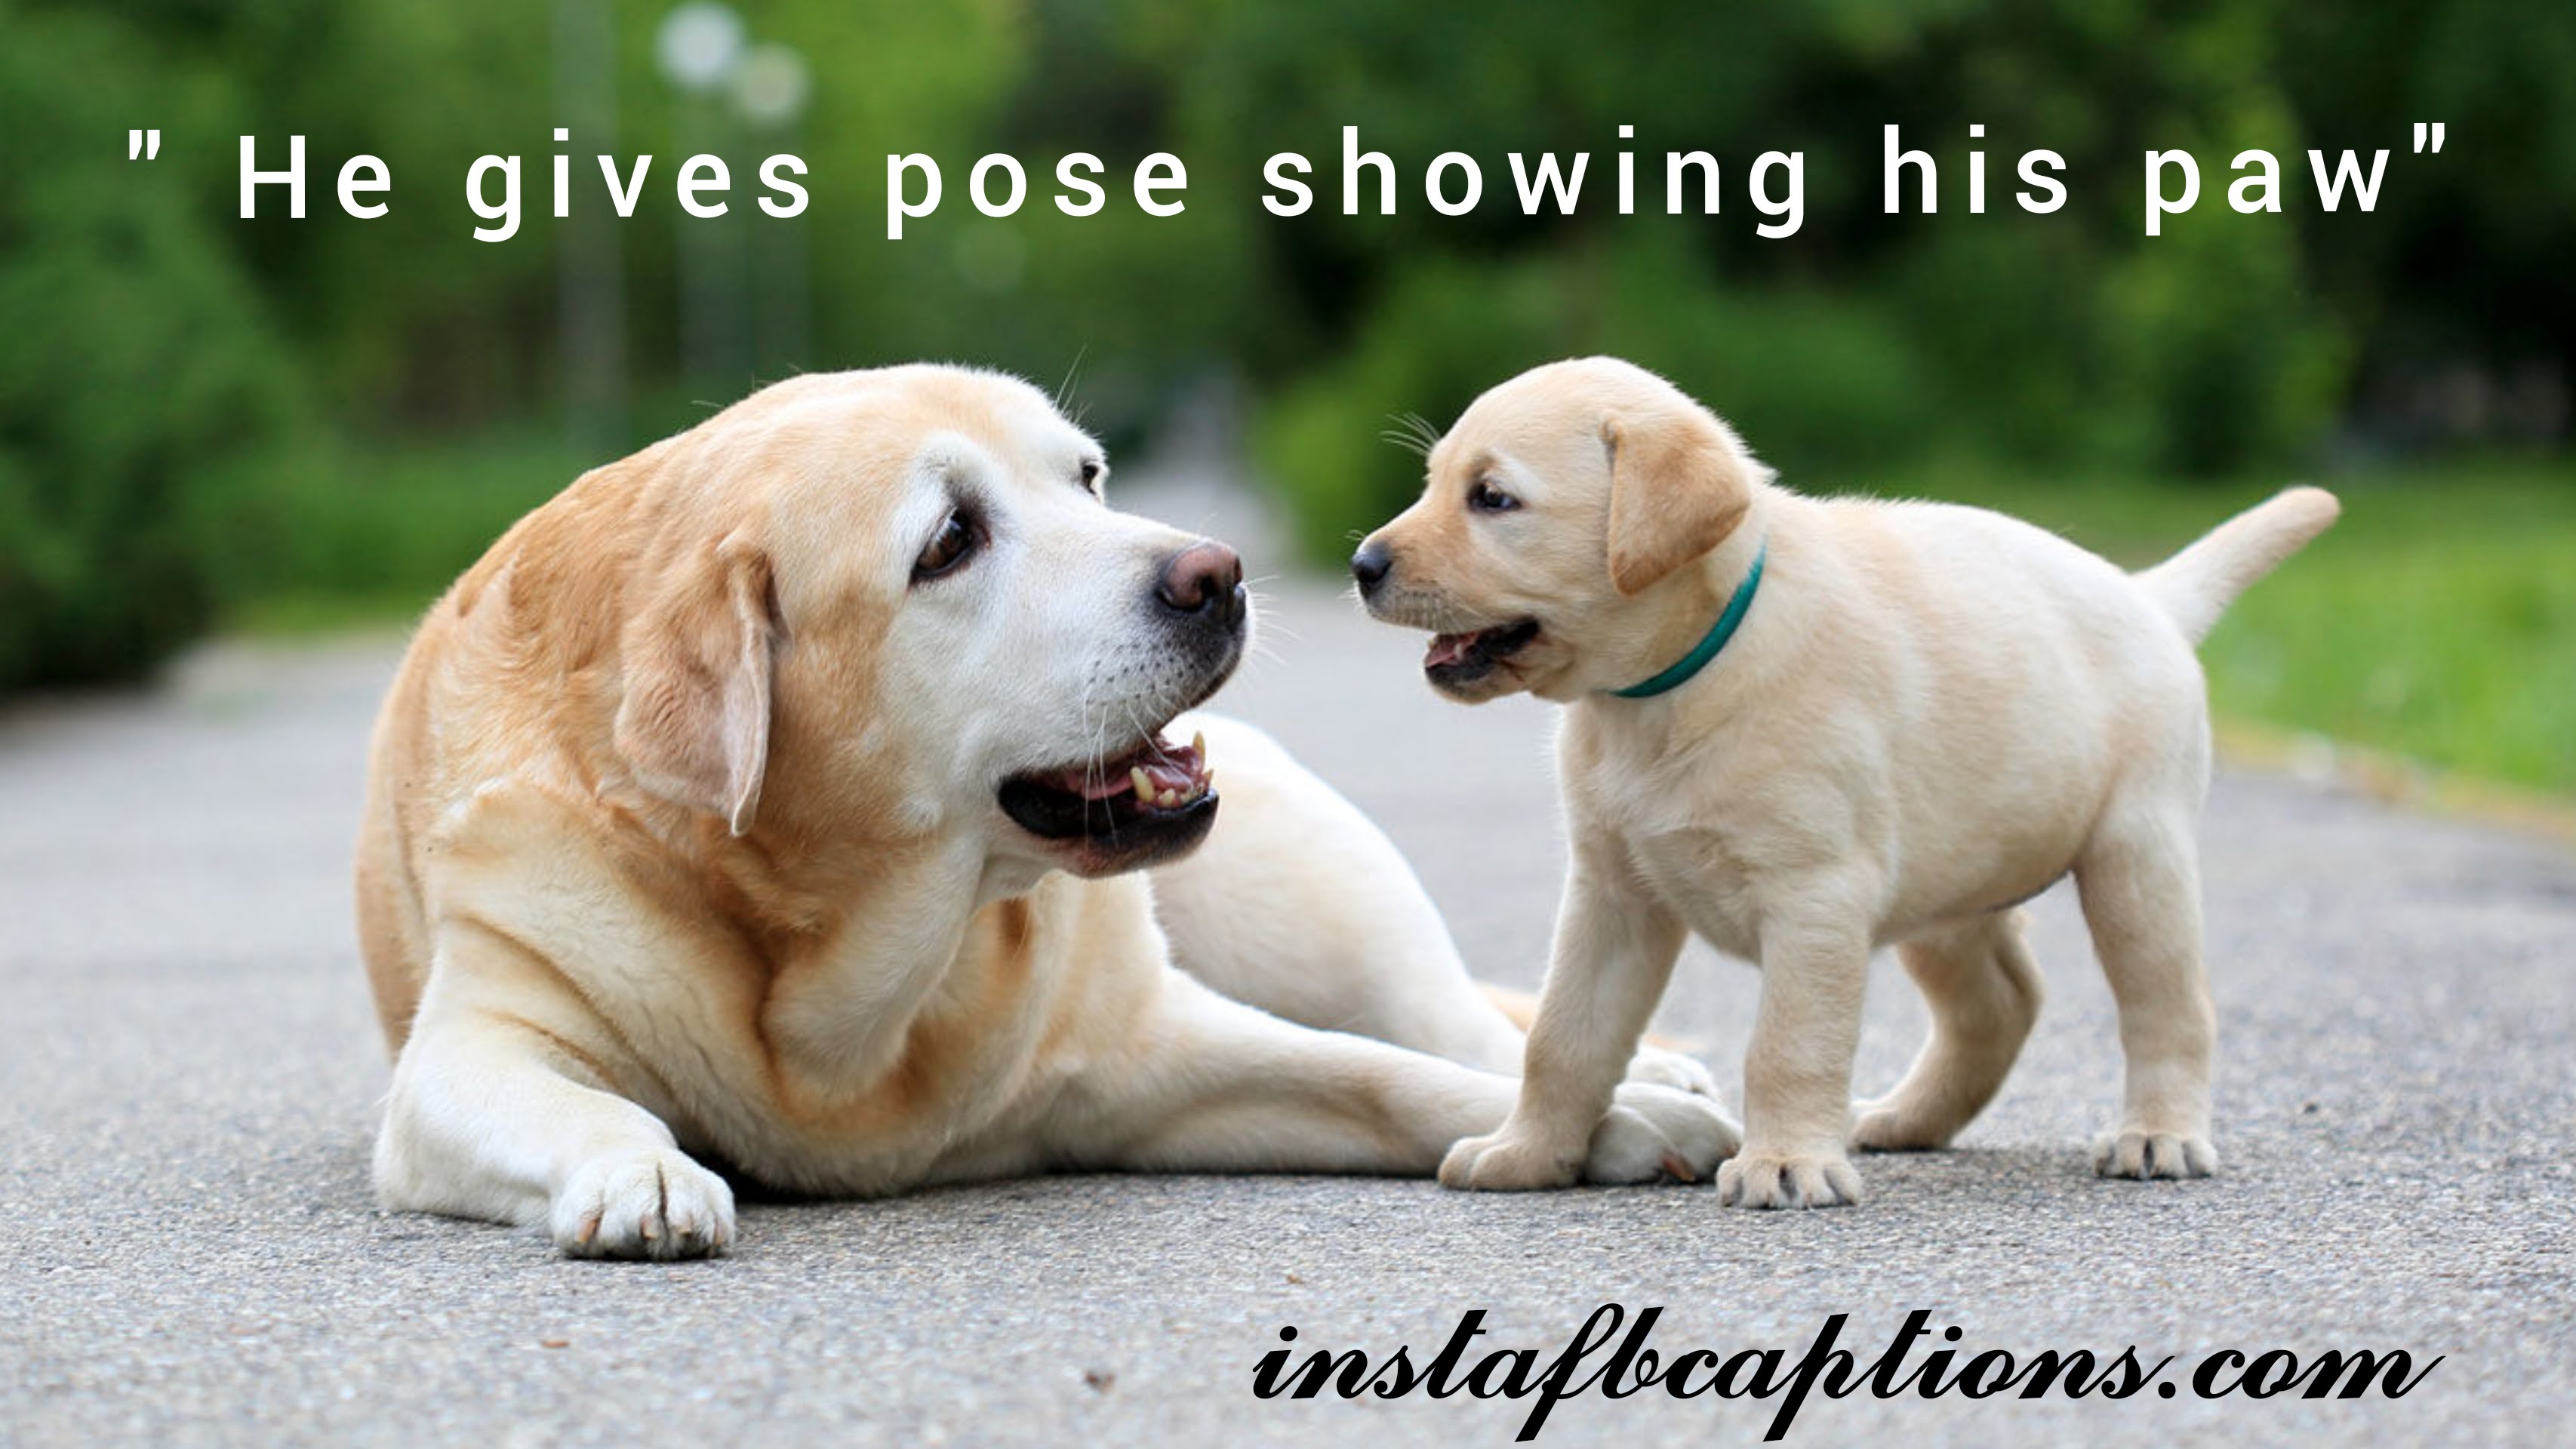 He gives pose showing his paw.  - Selfie With Dogs Captions - 125+ Pawfect Instagram Captions for Puppy Lovers in 2022